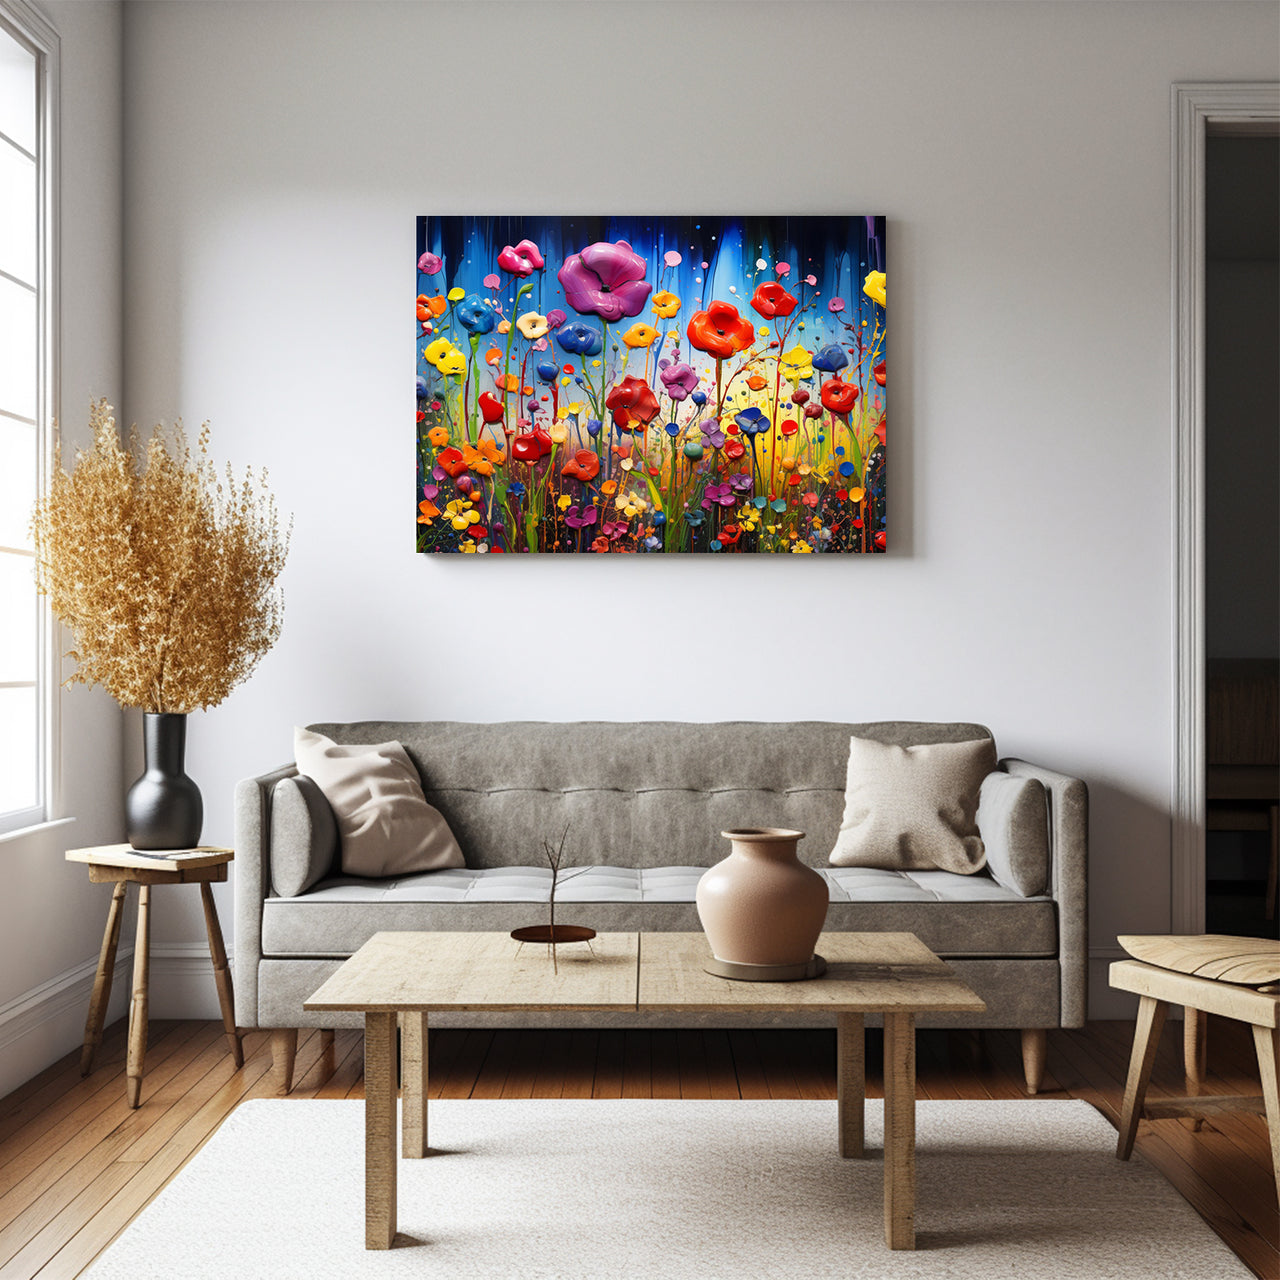 Wildflowers on Canvas, Colorful Wildflower Field Art Print 04, Minimalist Flower Wall Art, Abstract Wall Art, Watercolor flowers, Floral Print, Classic, Rustic Farmhouse, Wildflower Home Decor, Flower Painting Canvas, Floral Wall Art